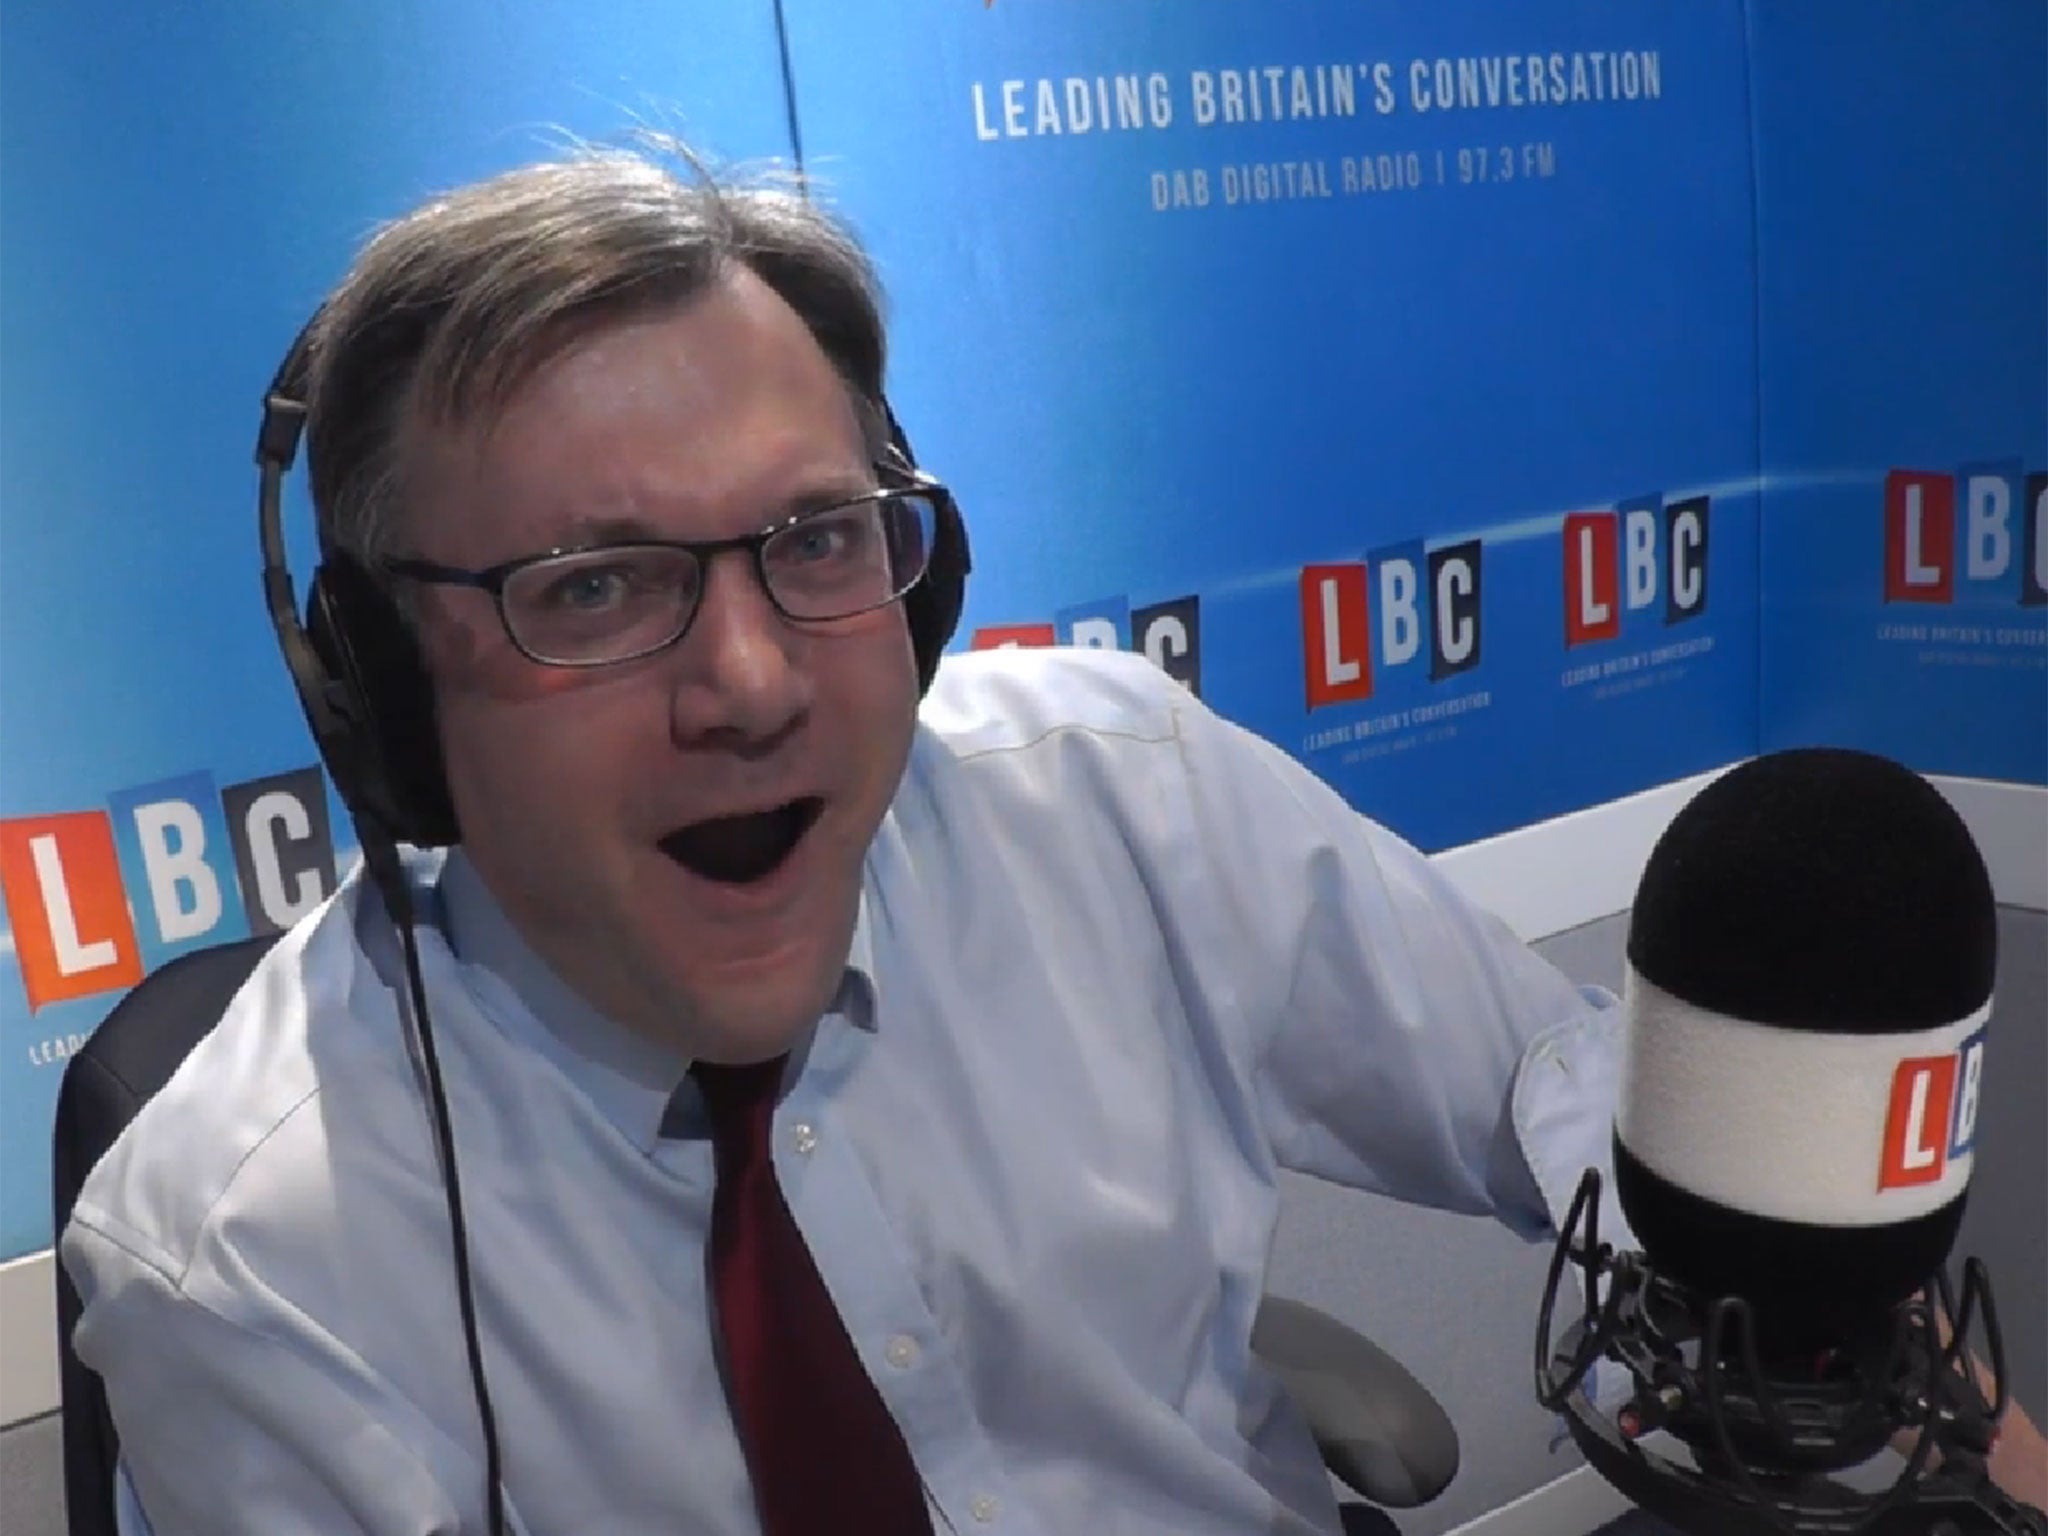 Ed Balls was asked about his sexual prowess during a birthday appearance on LBC Radio